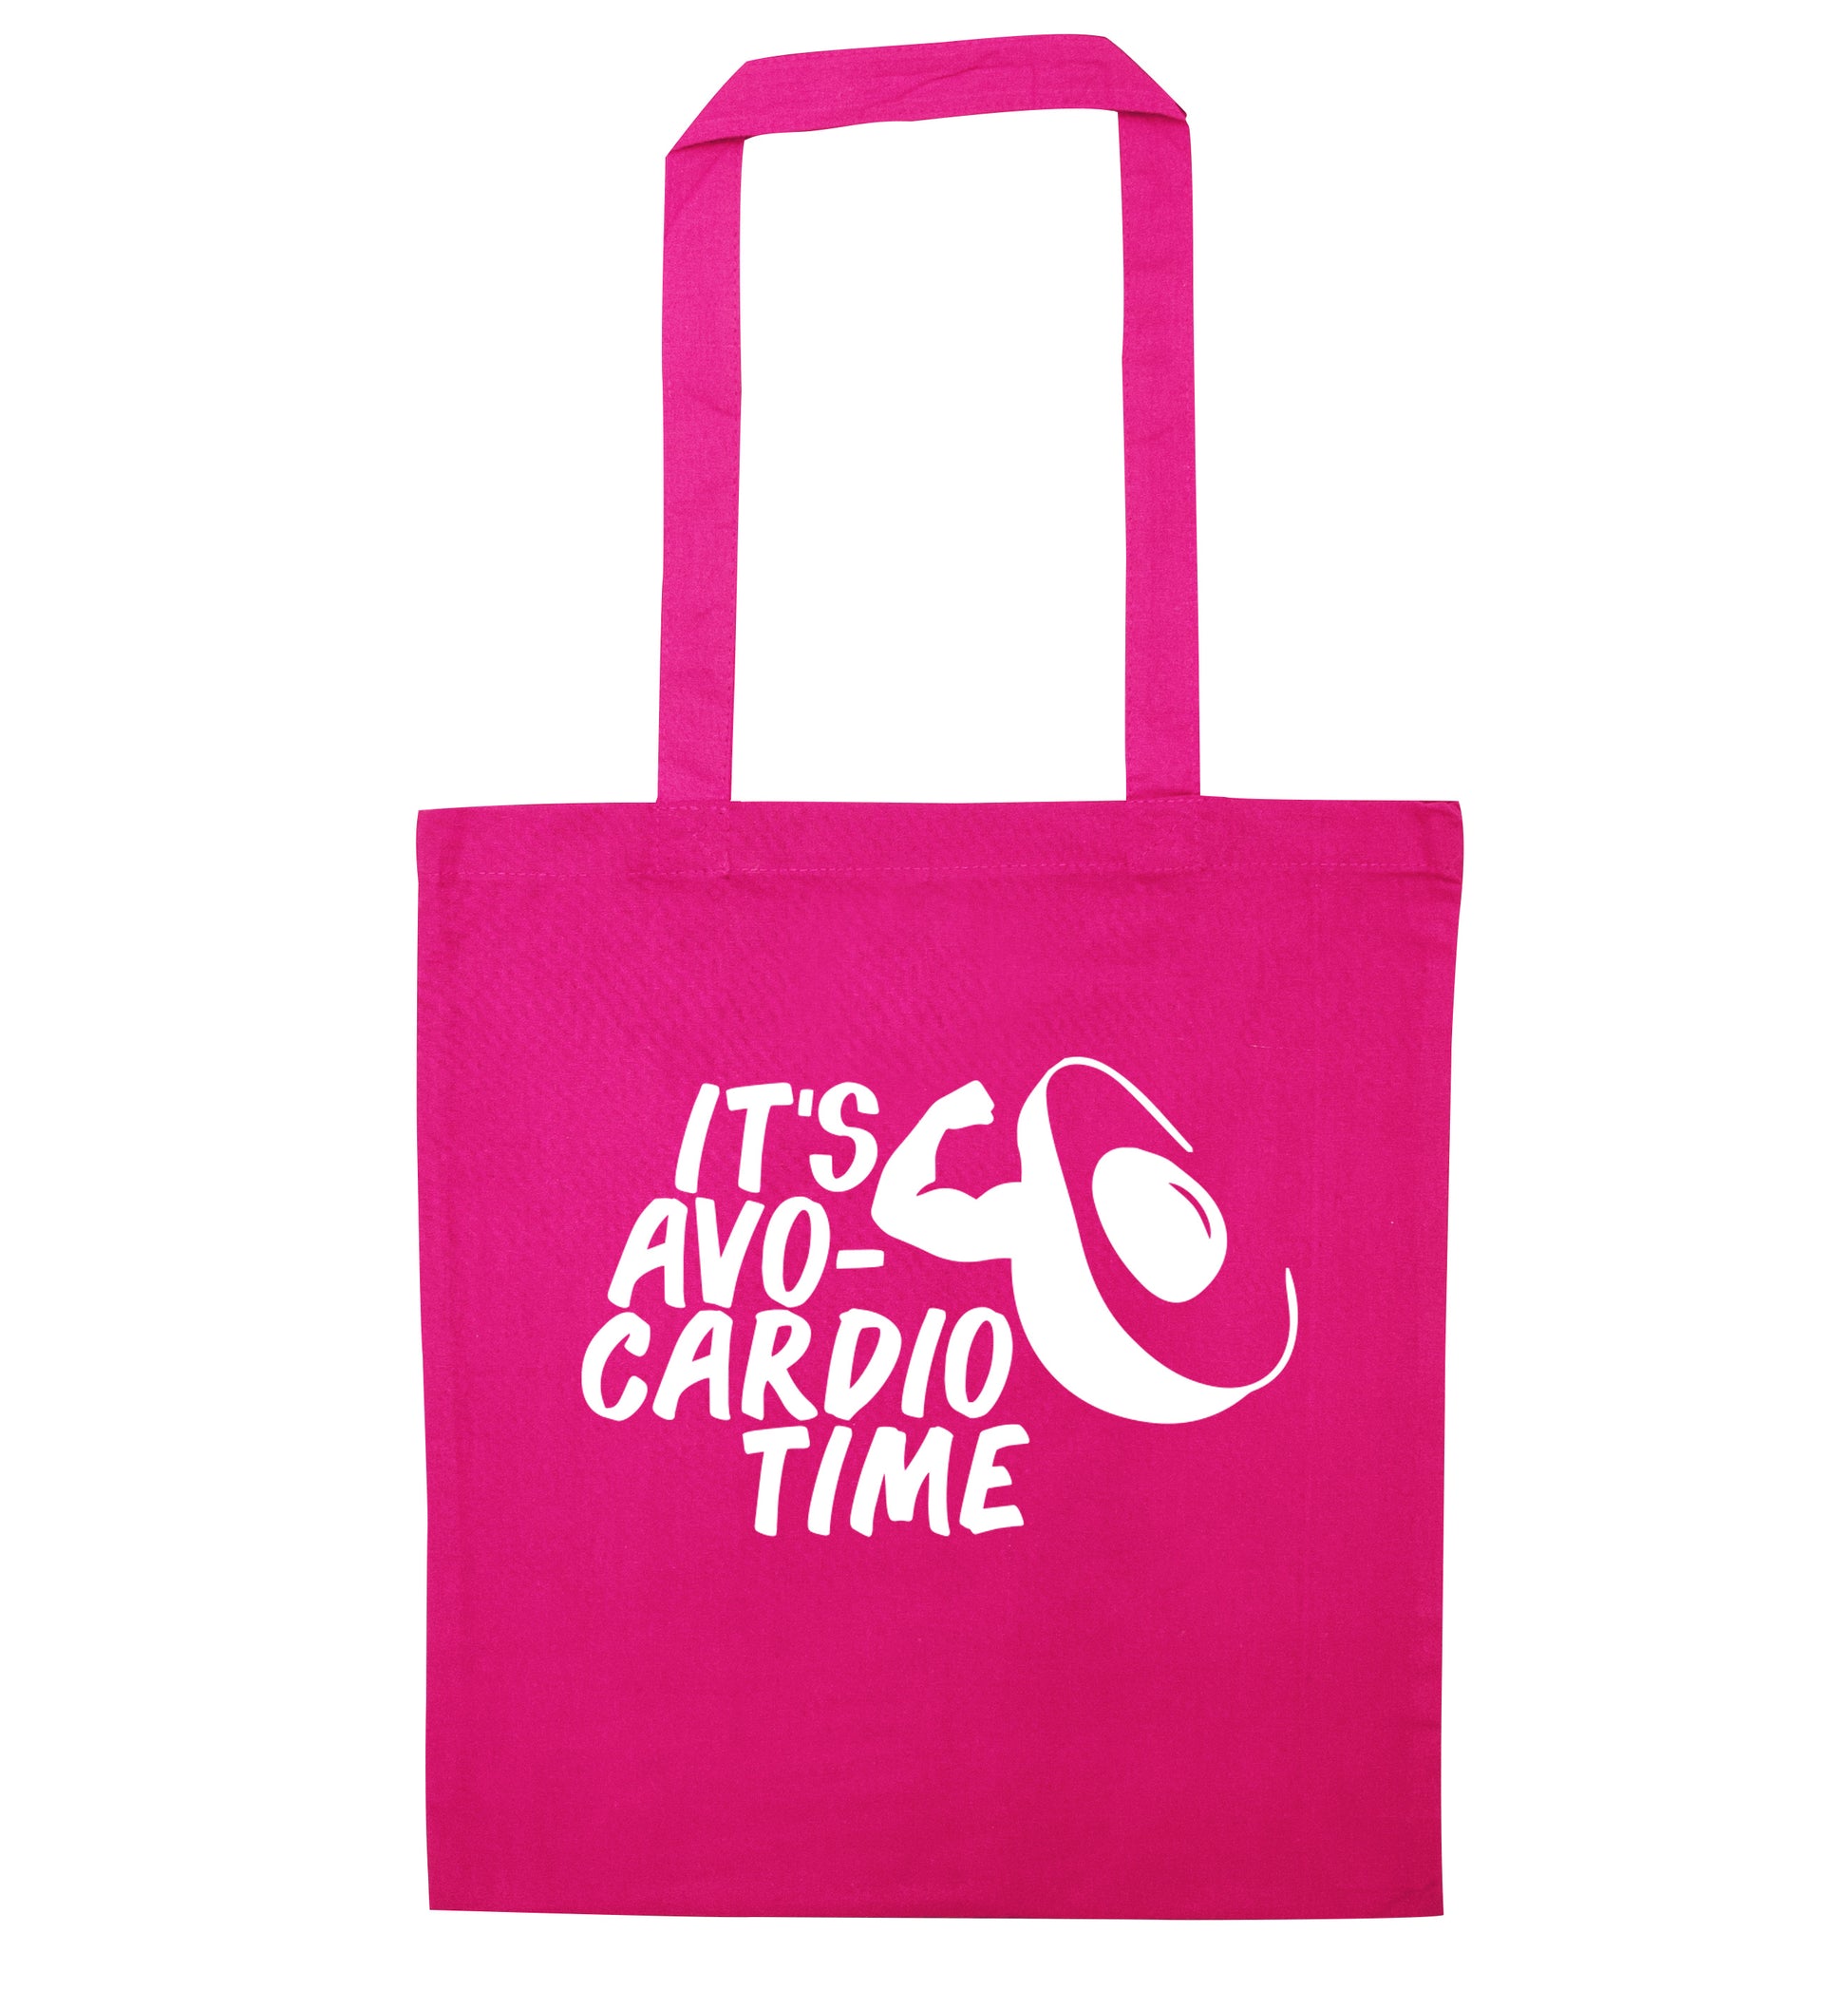 It's avo-cardio time pink tote bag